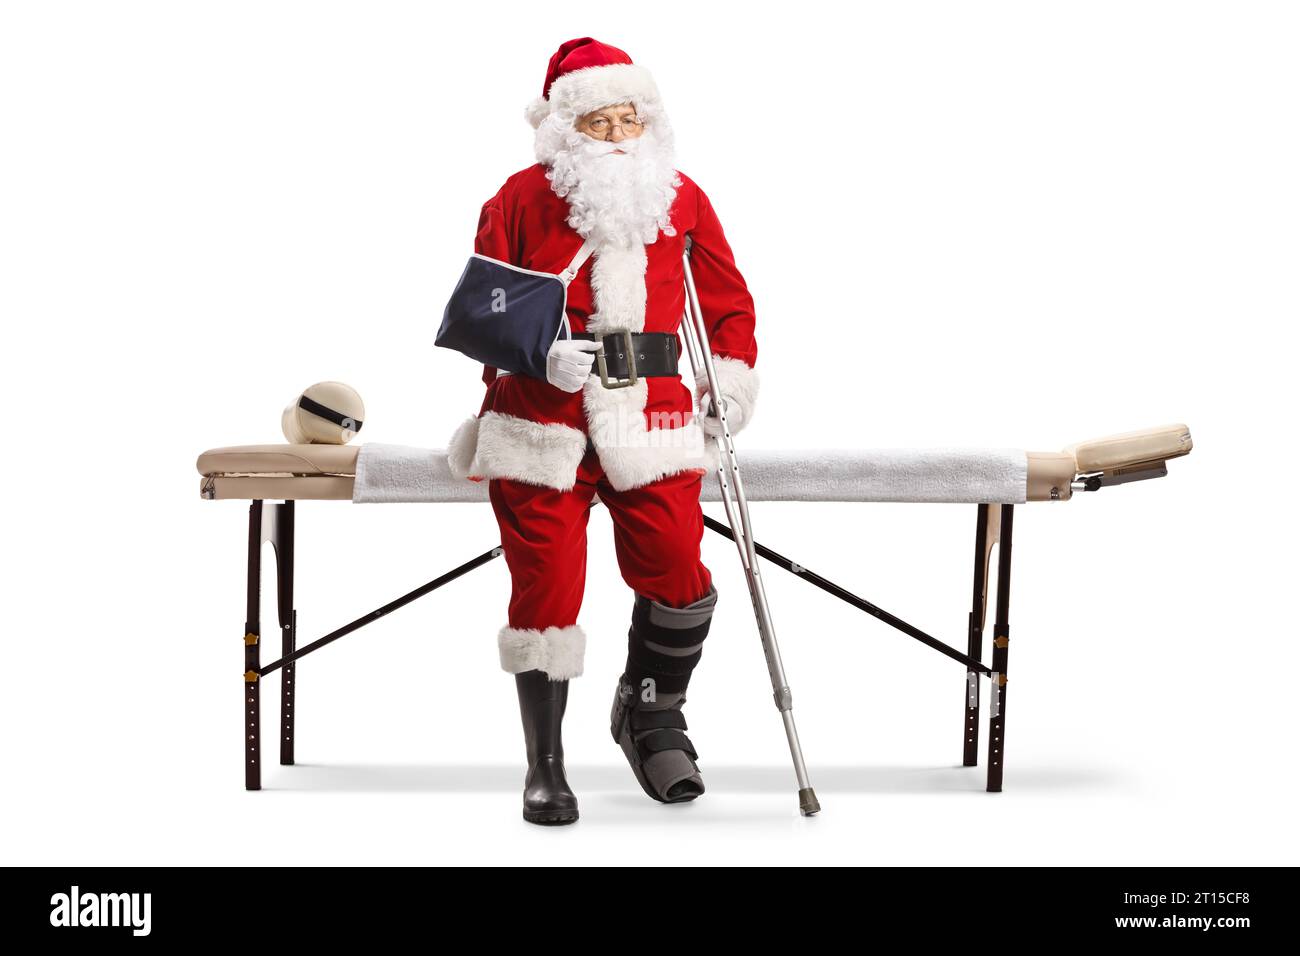 Sad santa claus with injured leg and arm sitting on a mat table isolated on white background Stock Photo